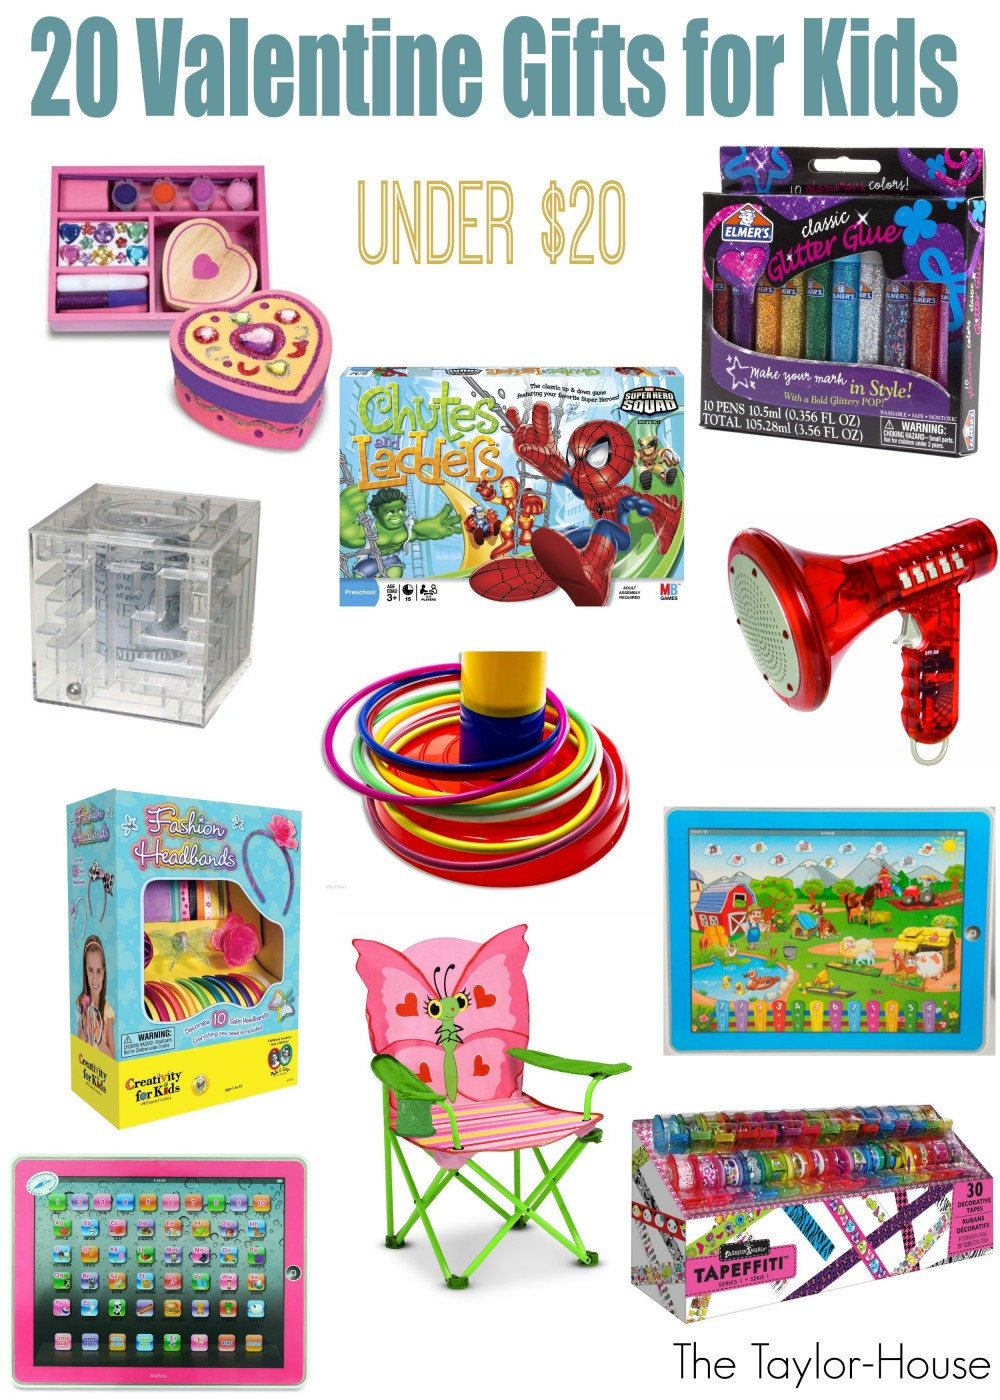 Useful Gifts For Kids
 Valentine Gift Ideas for Kids